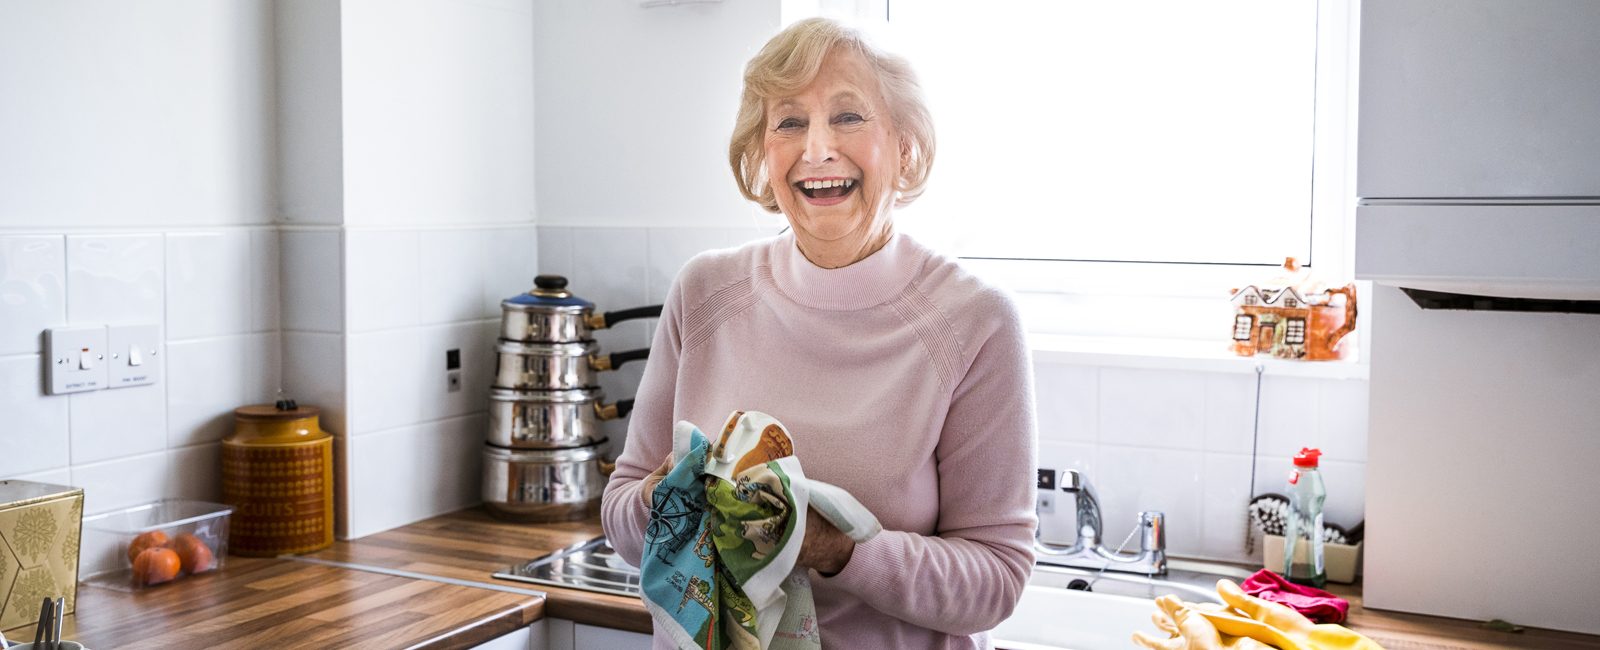 Stock older woman in kitchen